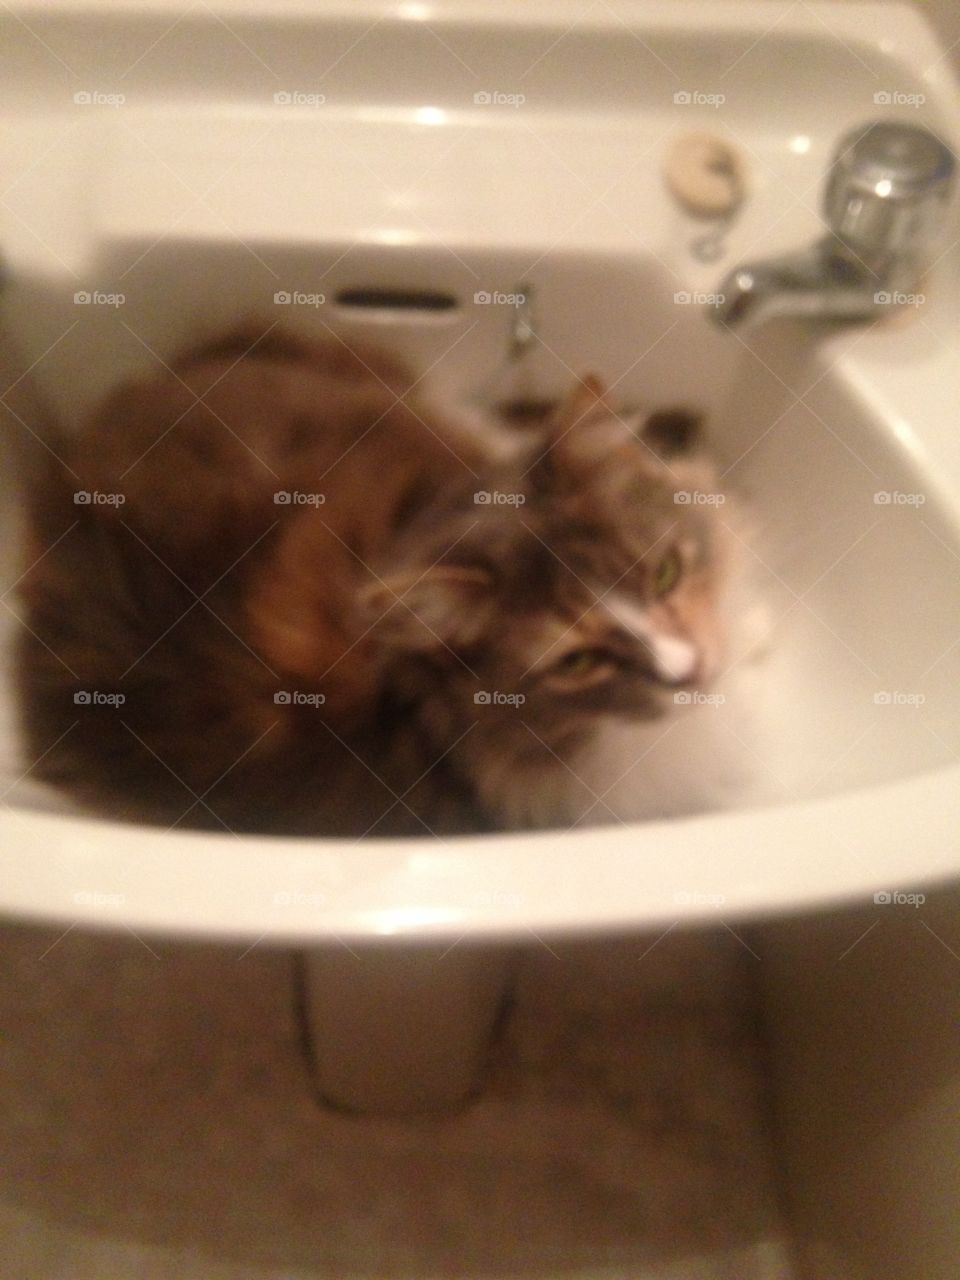 Misty, our Norwegian Forest Cat, barely managing to curl up in the sink. Time for a wash?